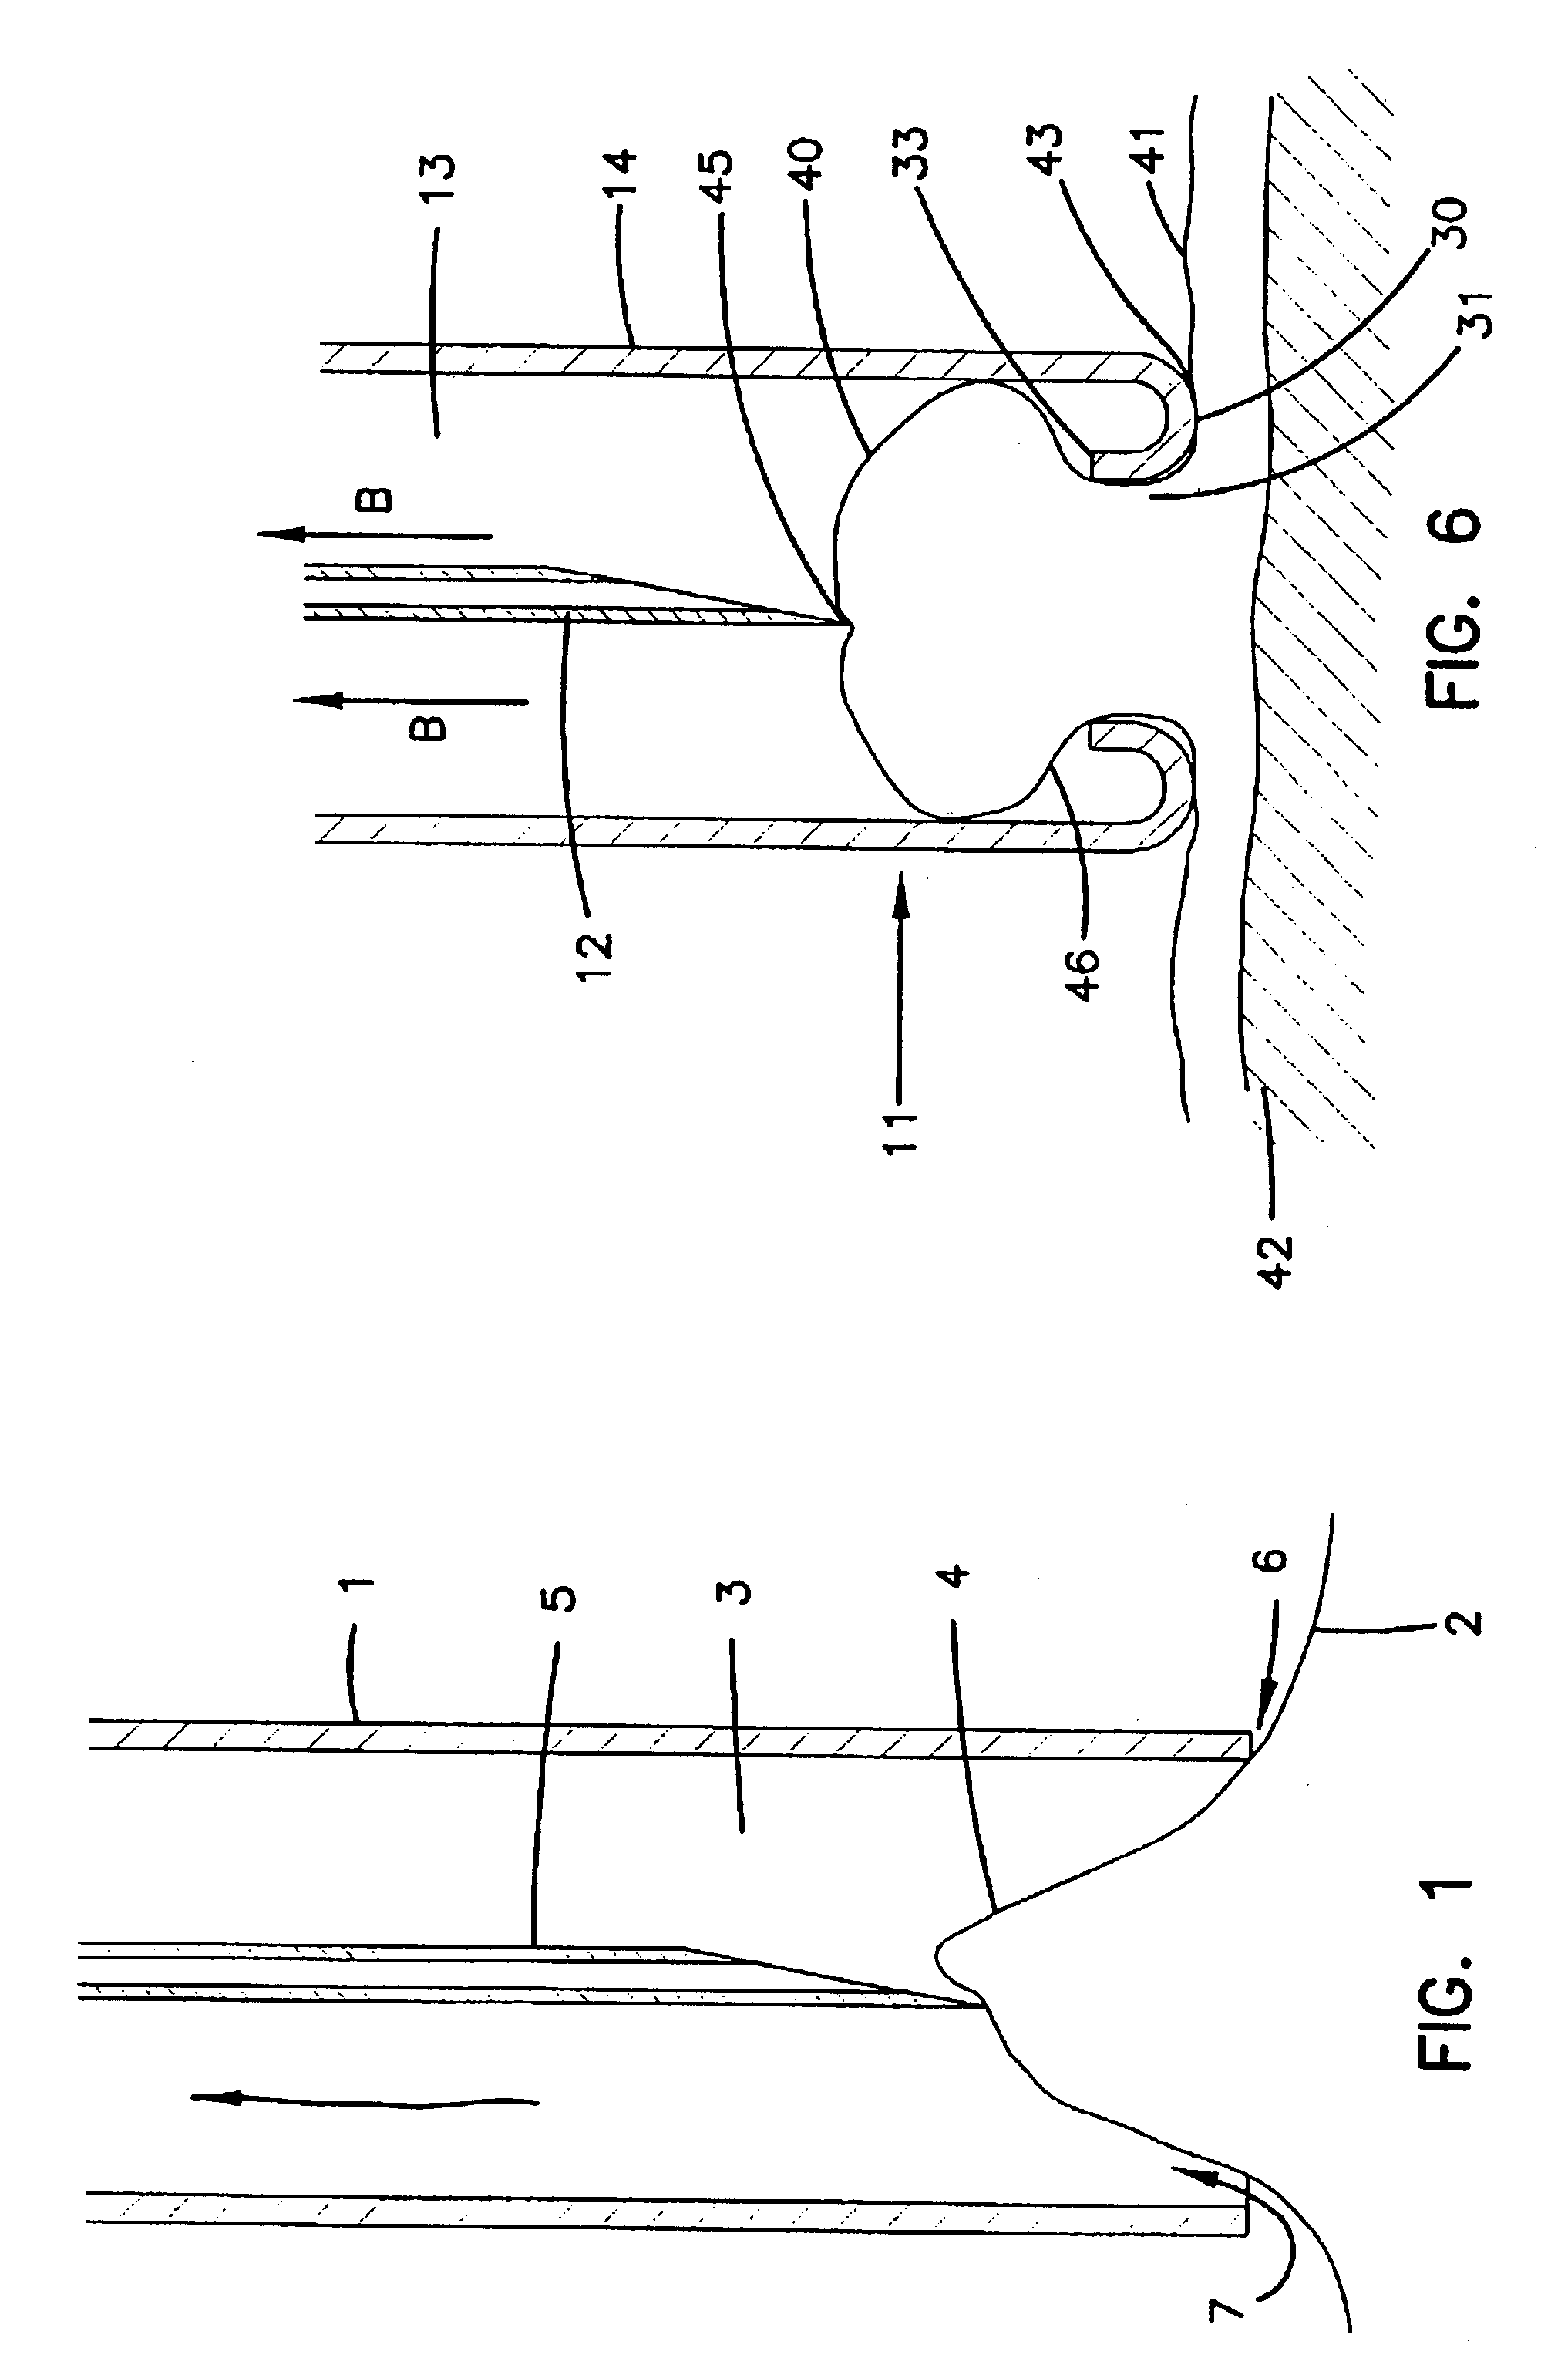 Direct pericardial access device and method